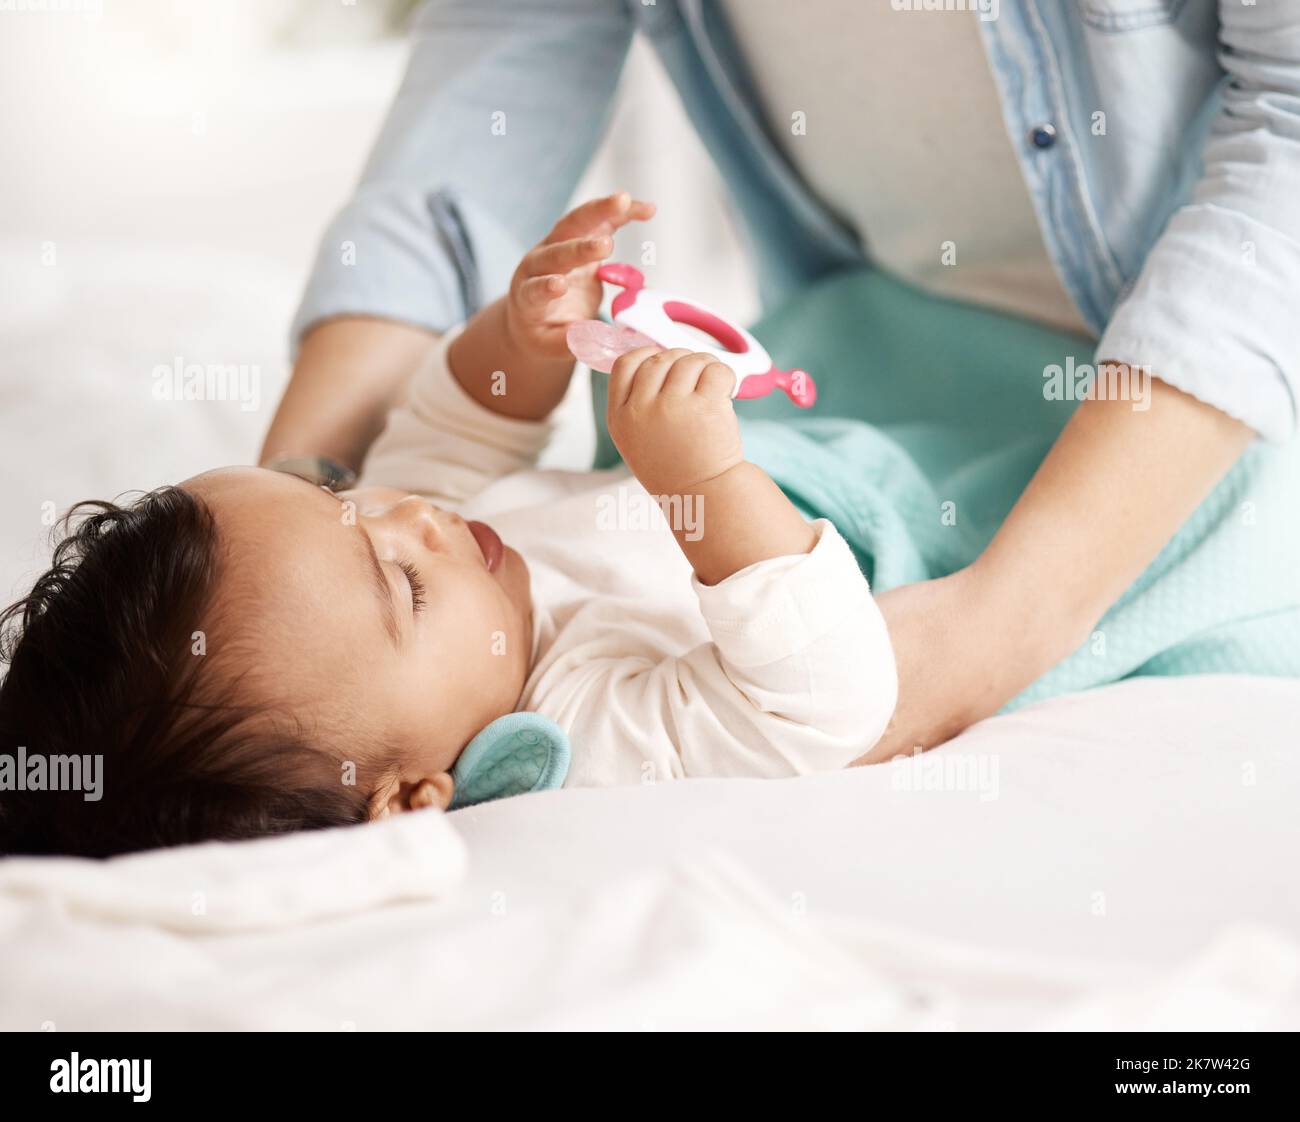 Getting her ready for the day. an adorable little girl playing with a teething toy. Stock Photo